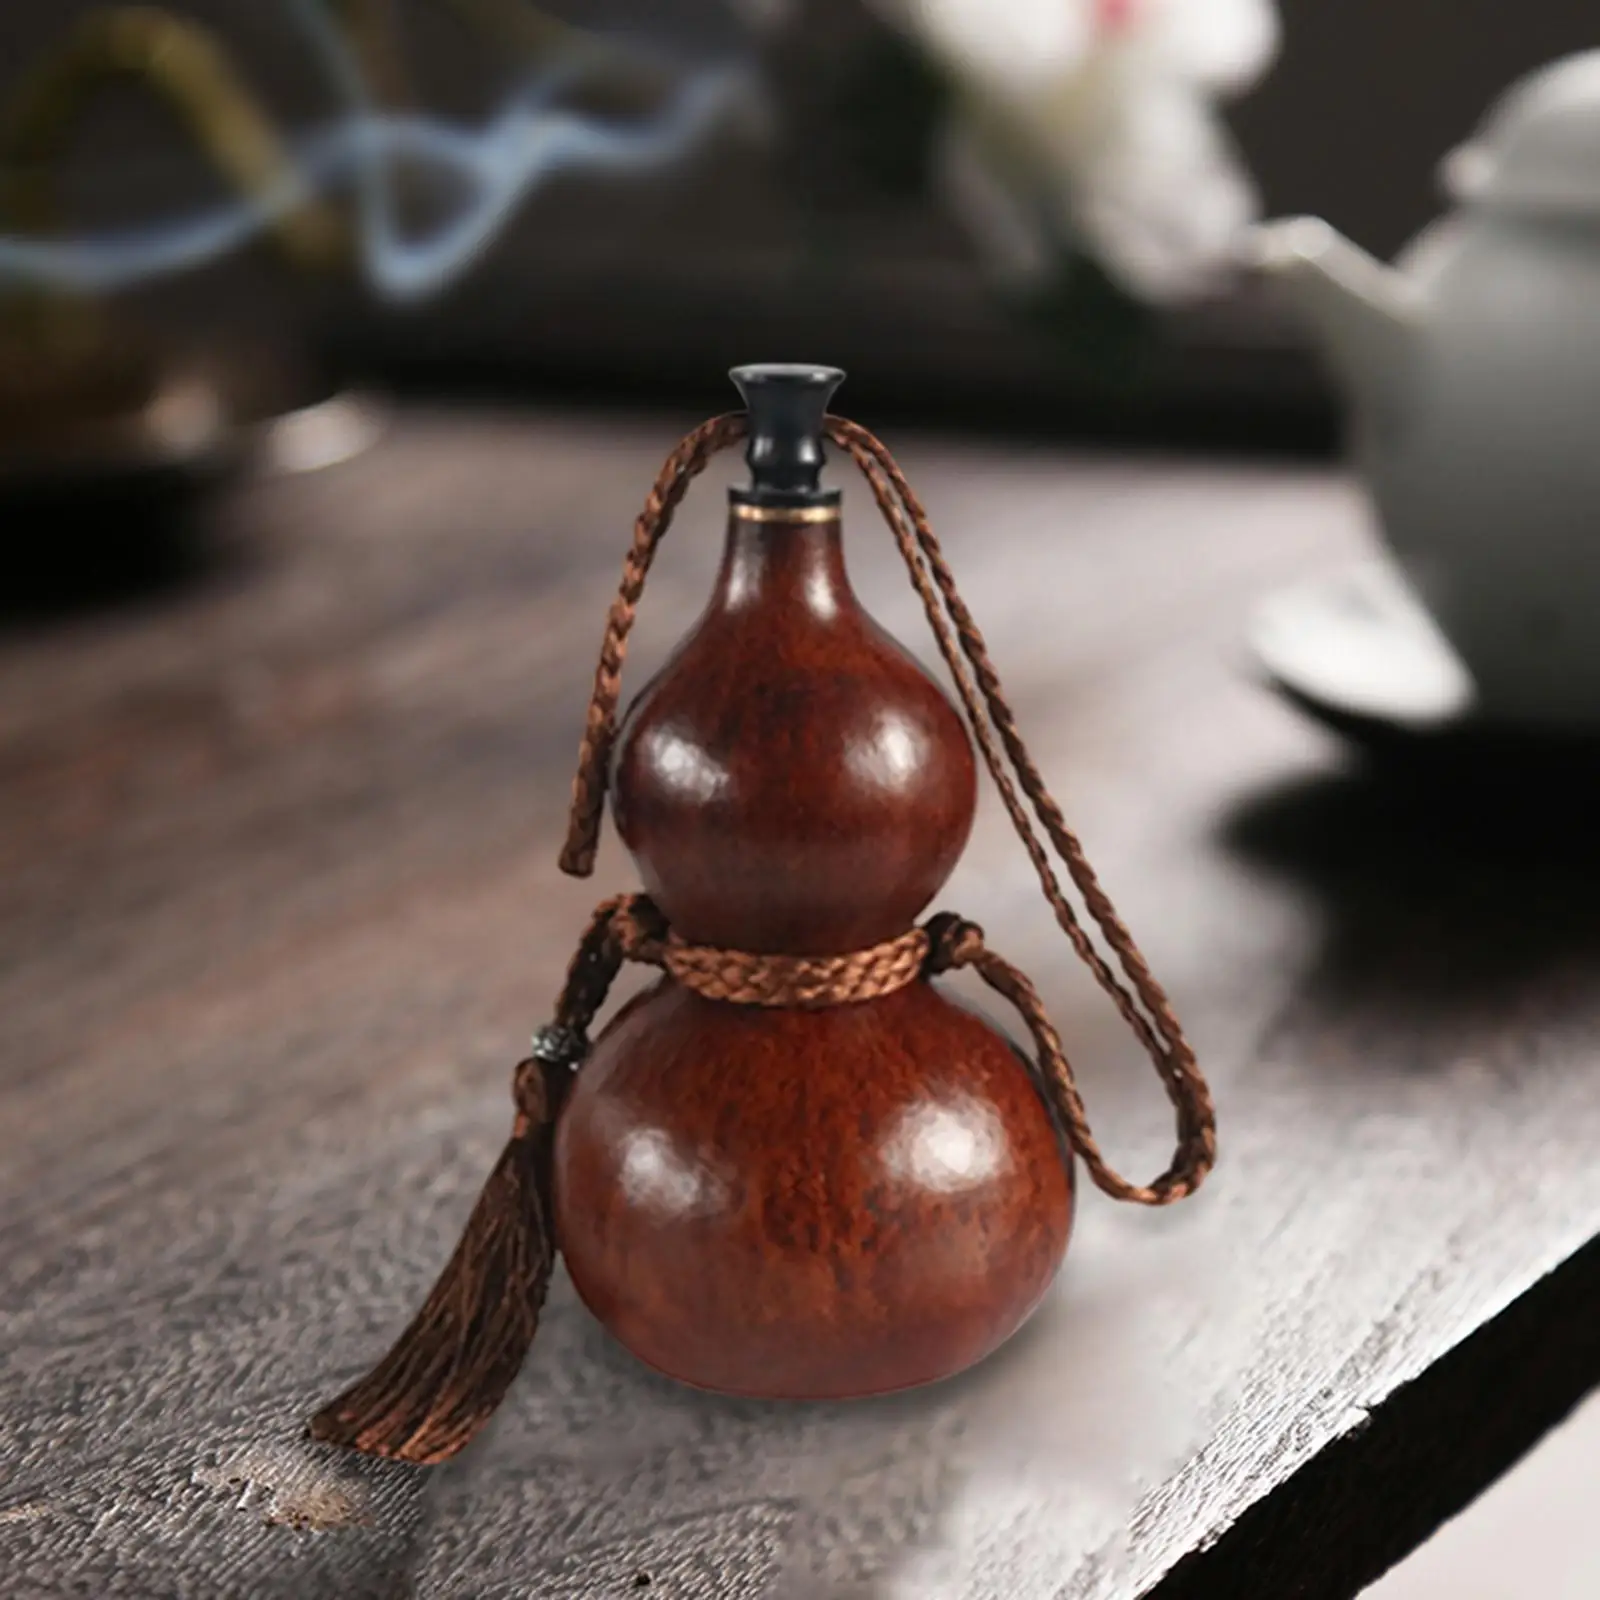 Water Bottle Gourd Wine Gourd Beverage Kettle Mens Gifts, Small Dried Gourd Flasks for Outdoor, Travel Barbecue Boating Decor